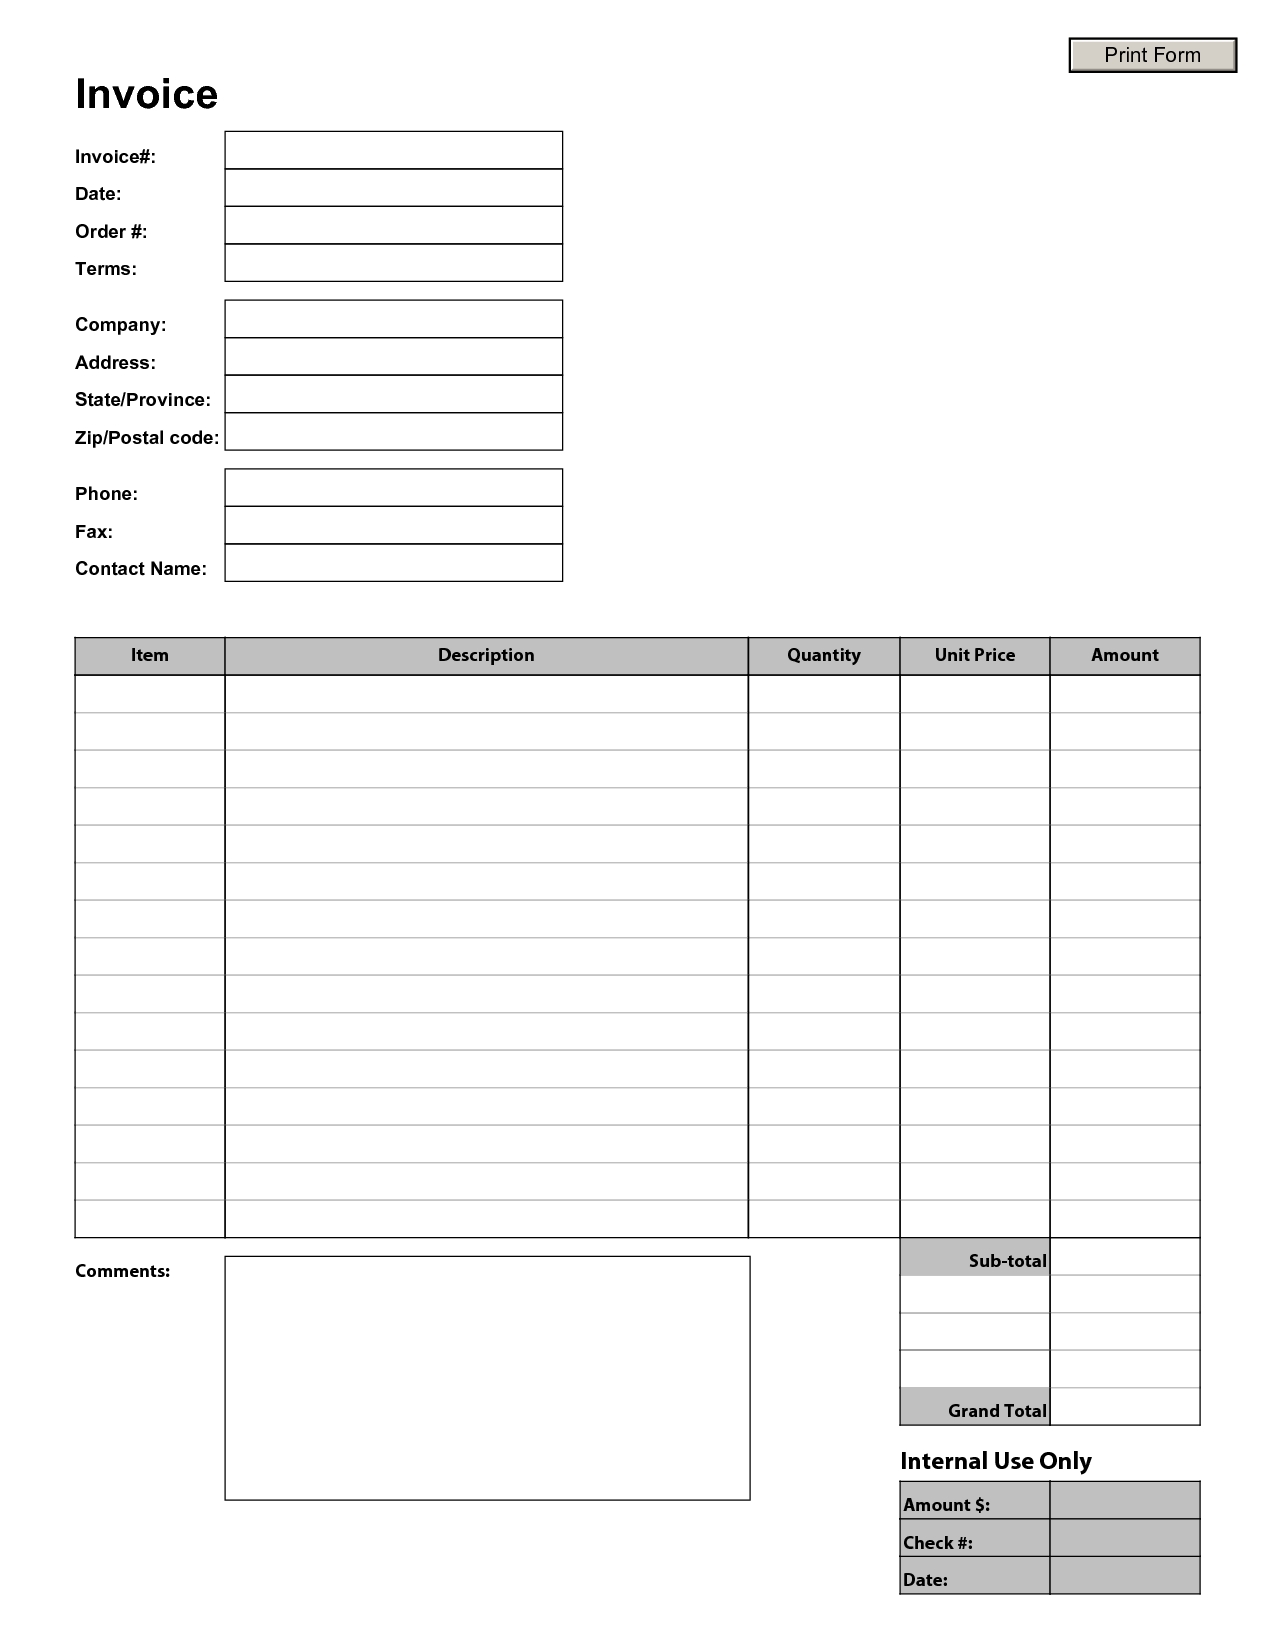 10 printable invoice templates and tips to create excel invoice printable invoice template word